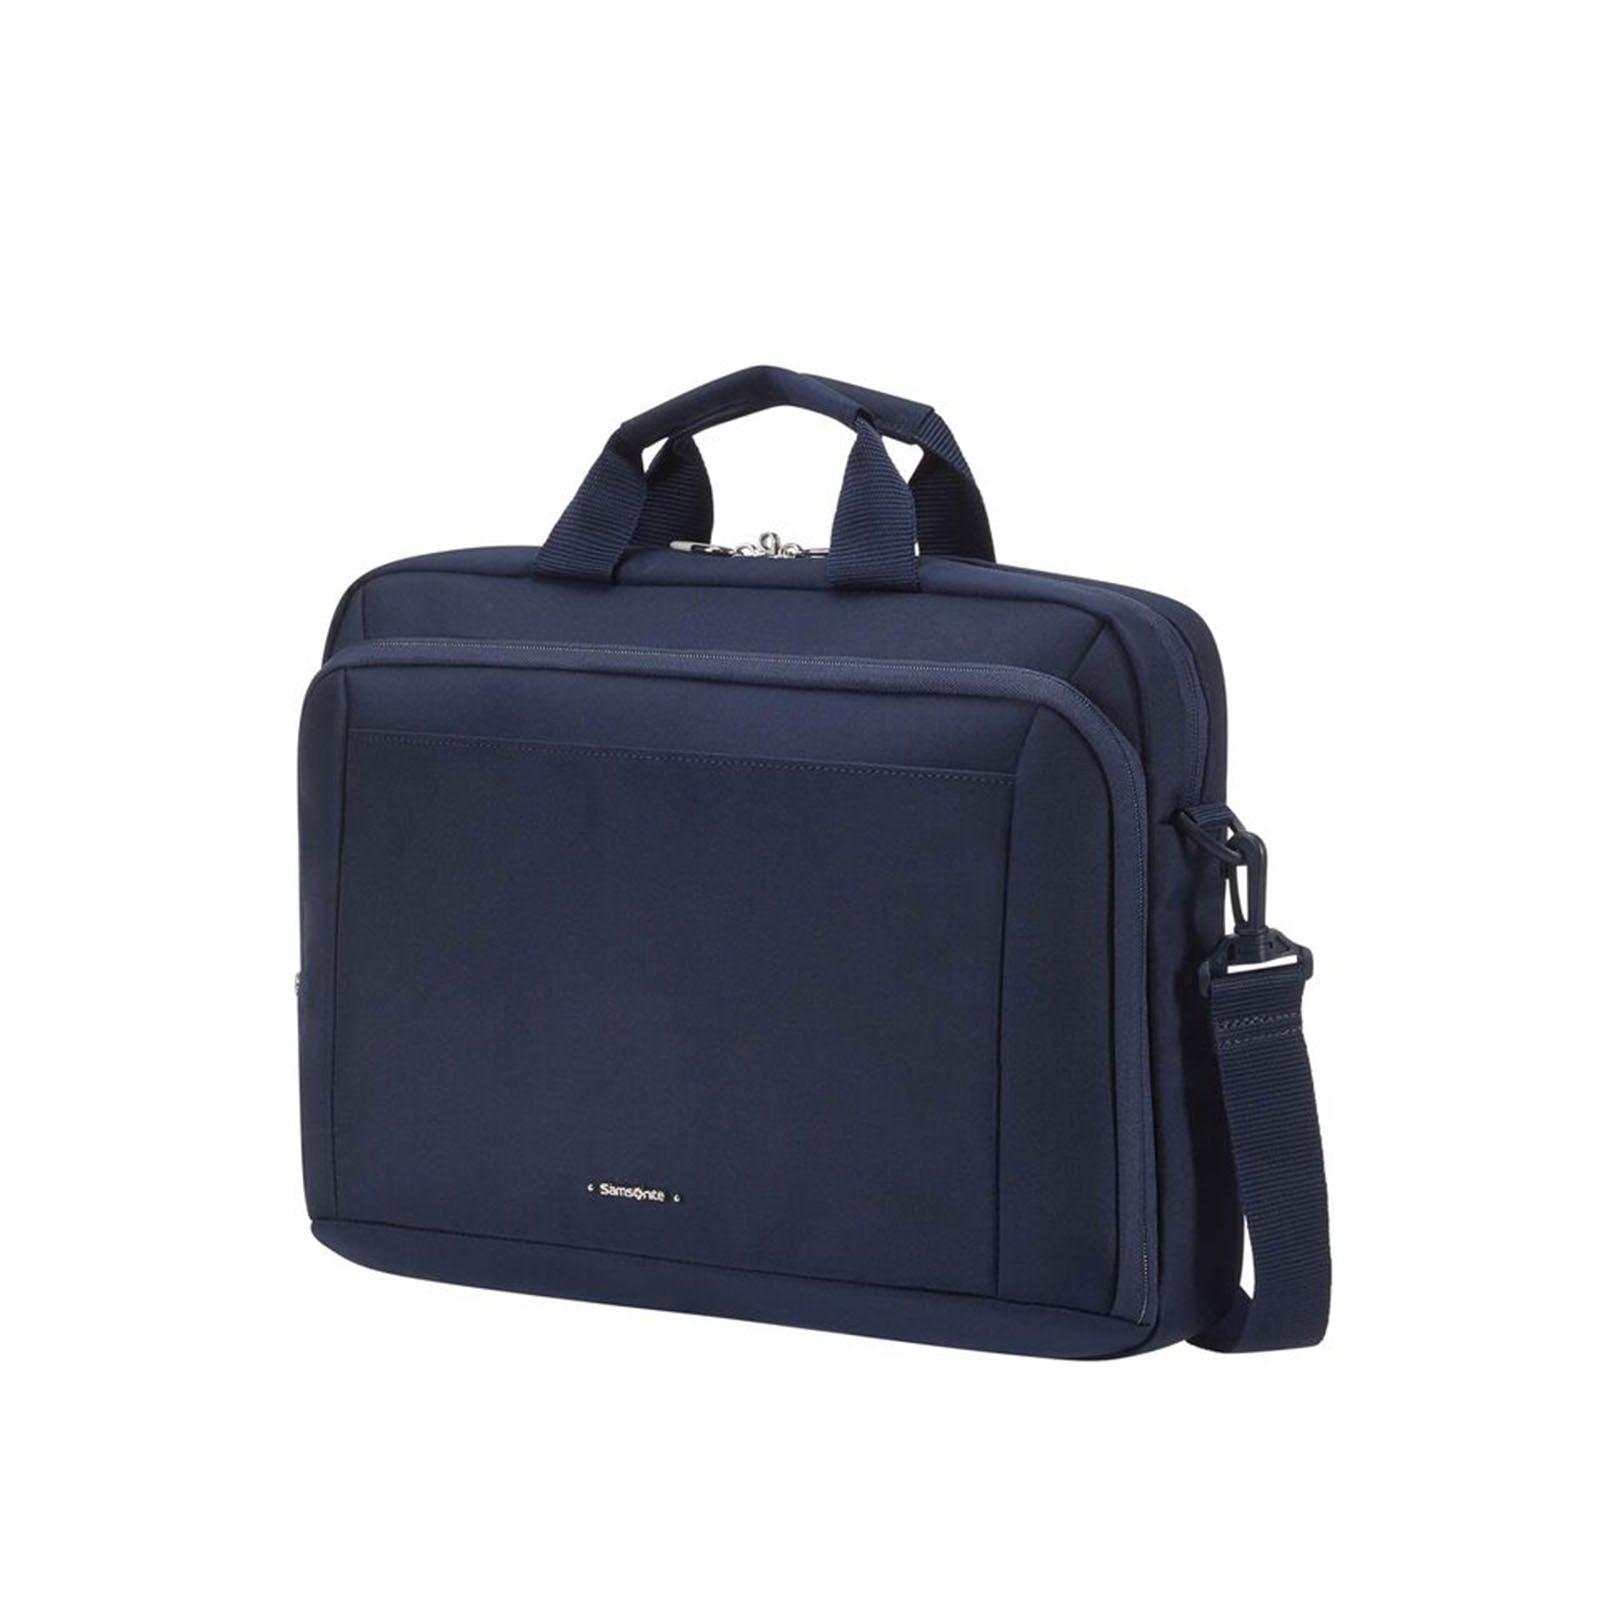 Samsonite-Guardit-Classy-15-Inch-Laptop-Bailhandle-Midnight-Blue-Front-Angle